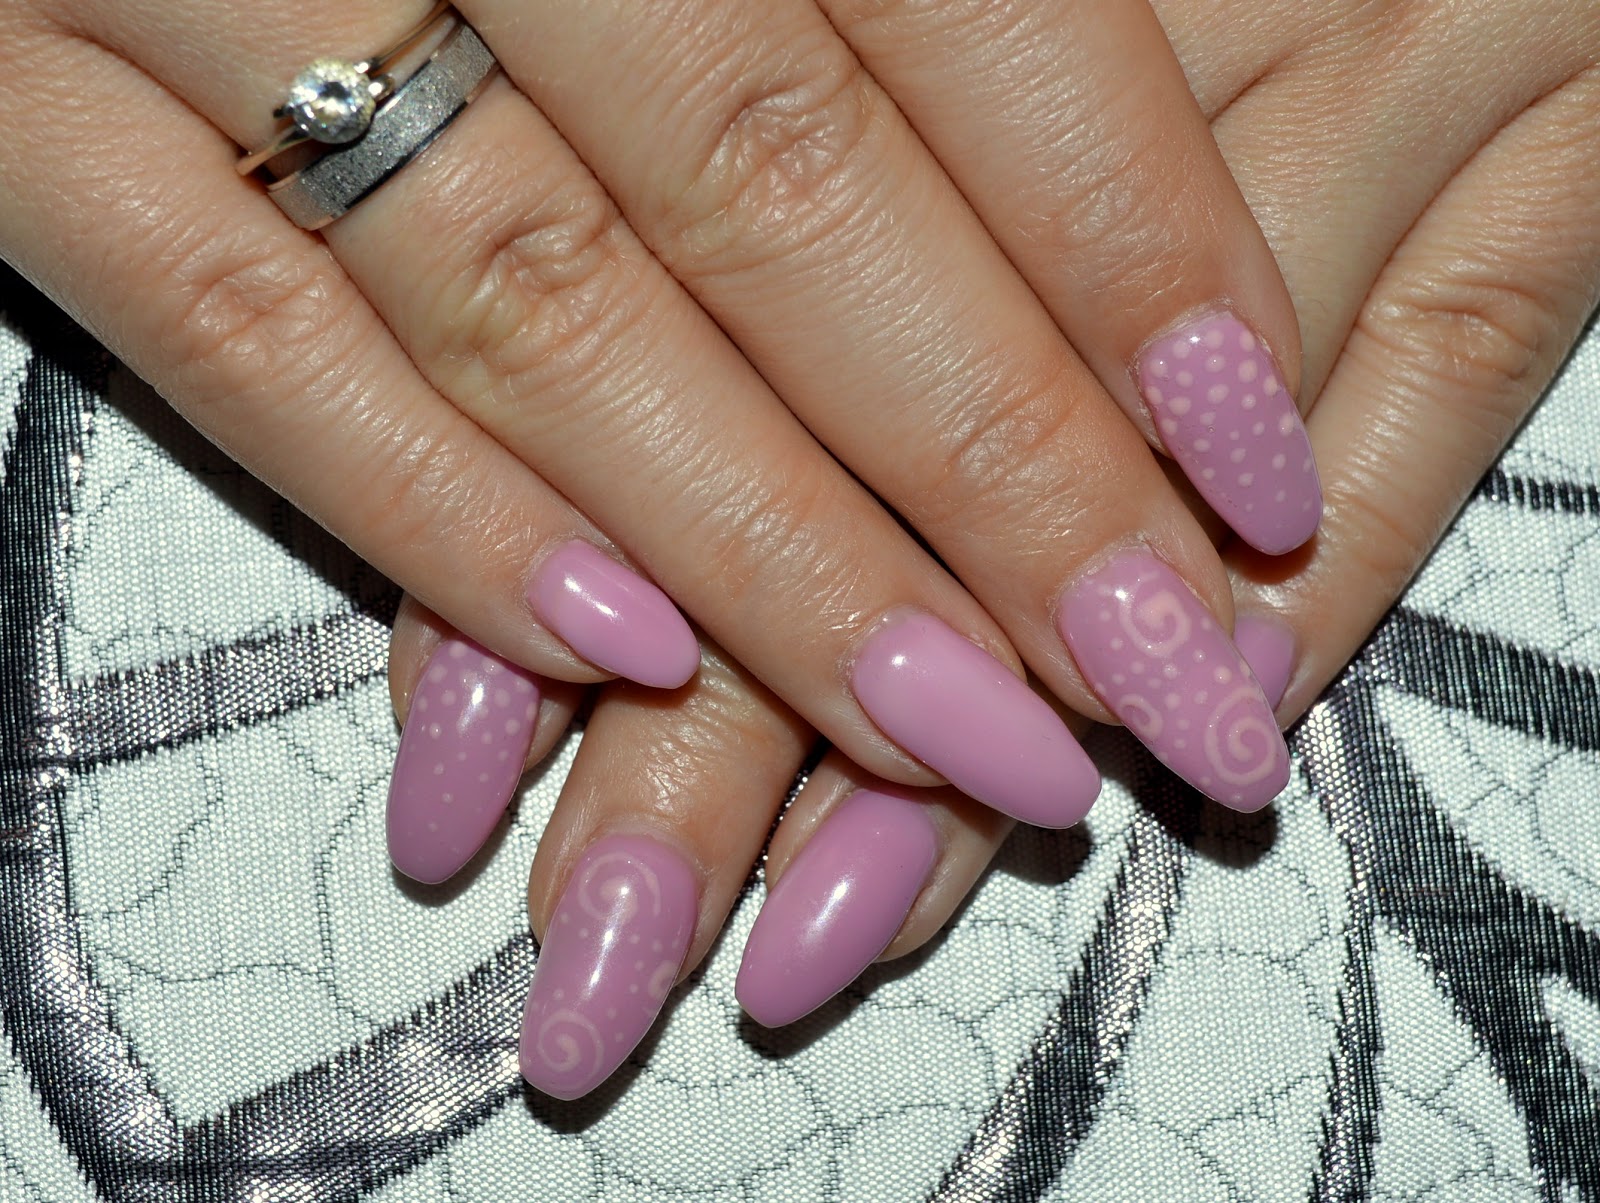 8. Lilac and Silver French Tip Gel Nails - wide 3